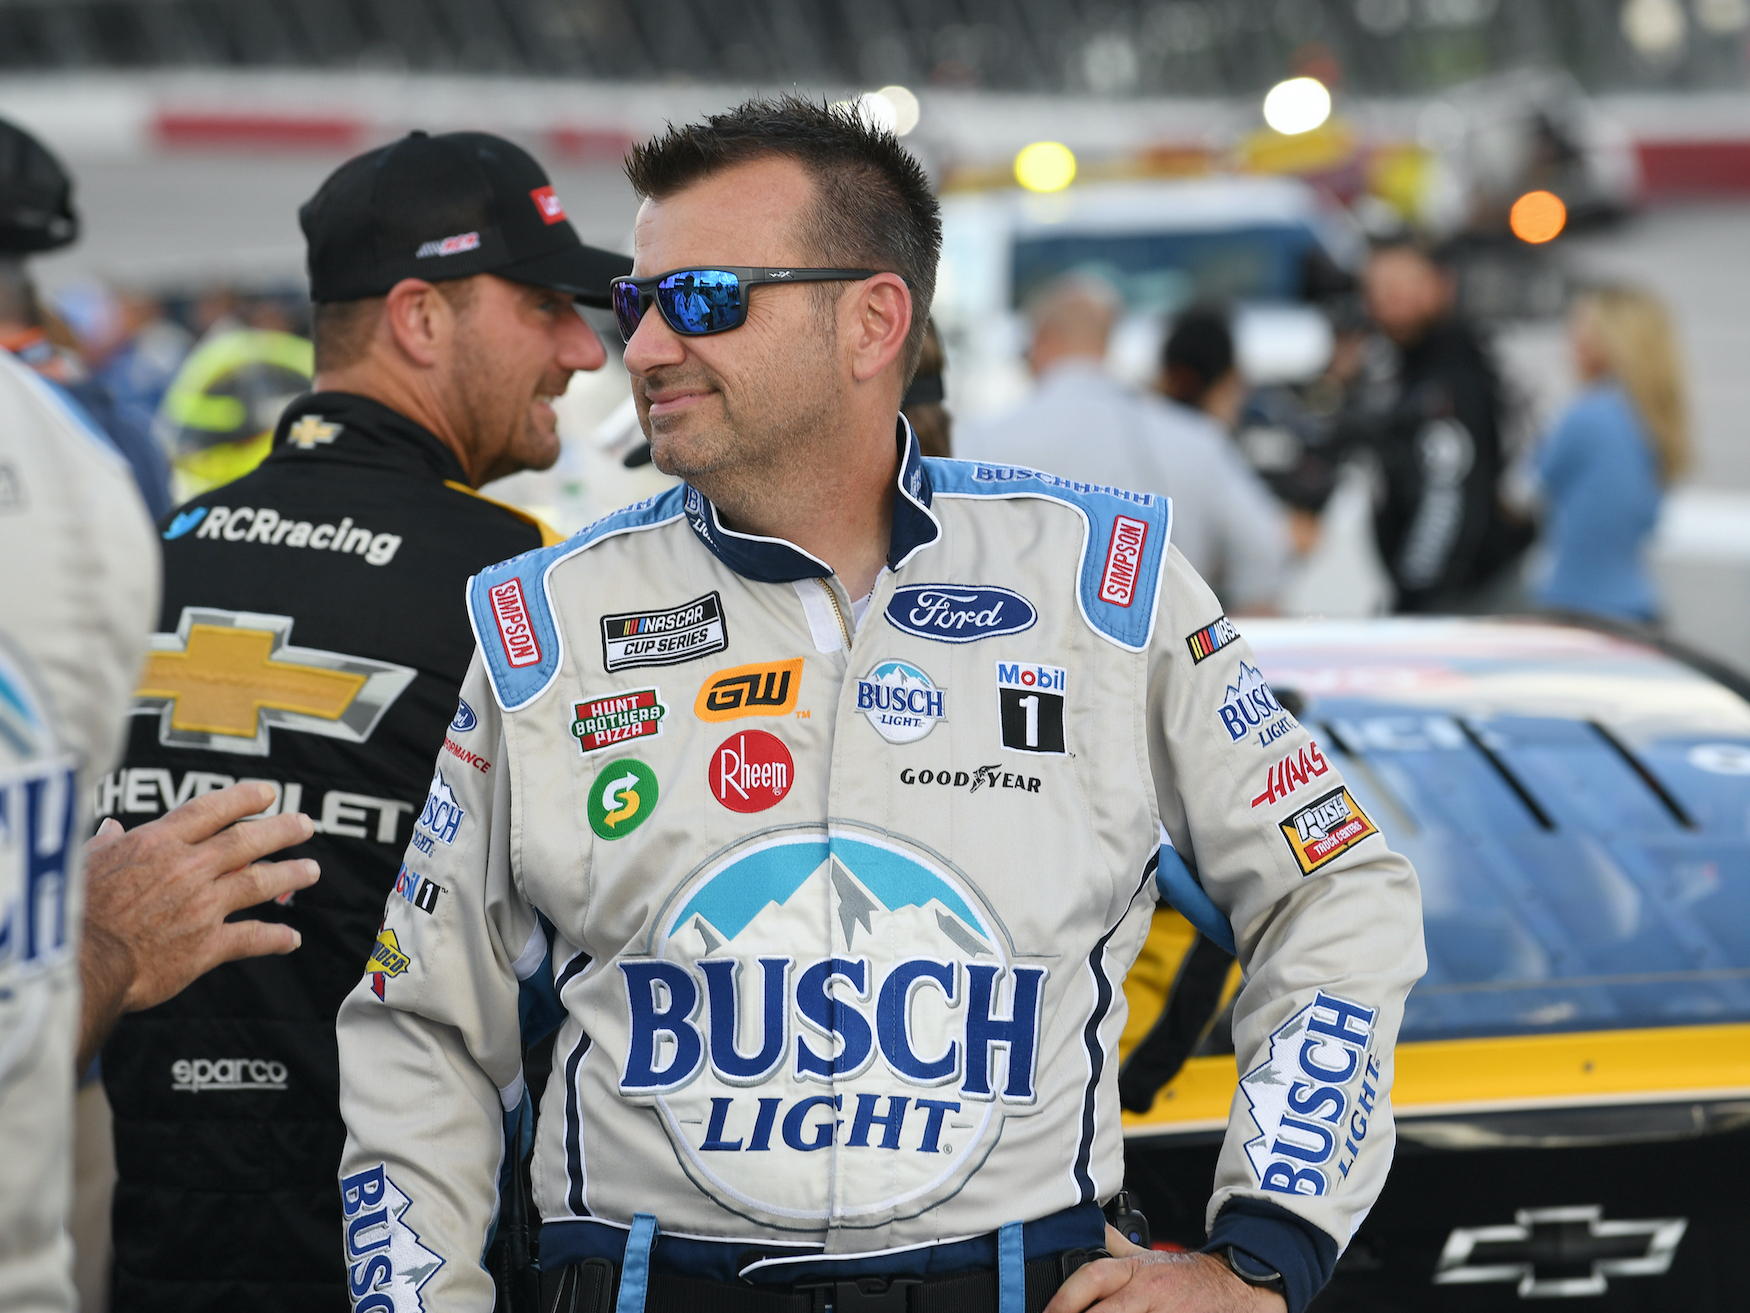 Kevin Harvick's crew chief Rodney Childers at race